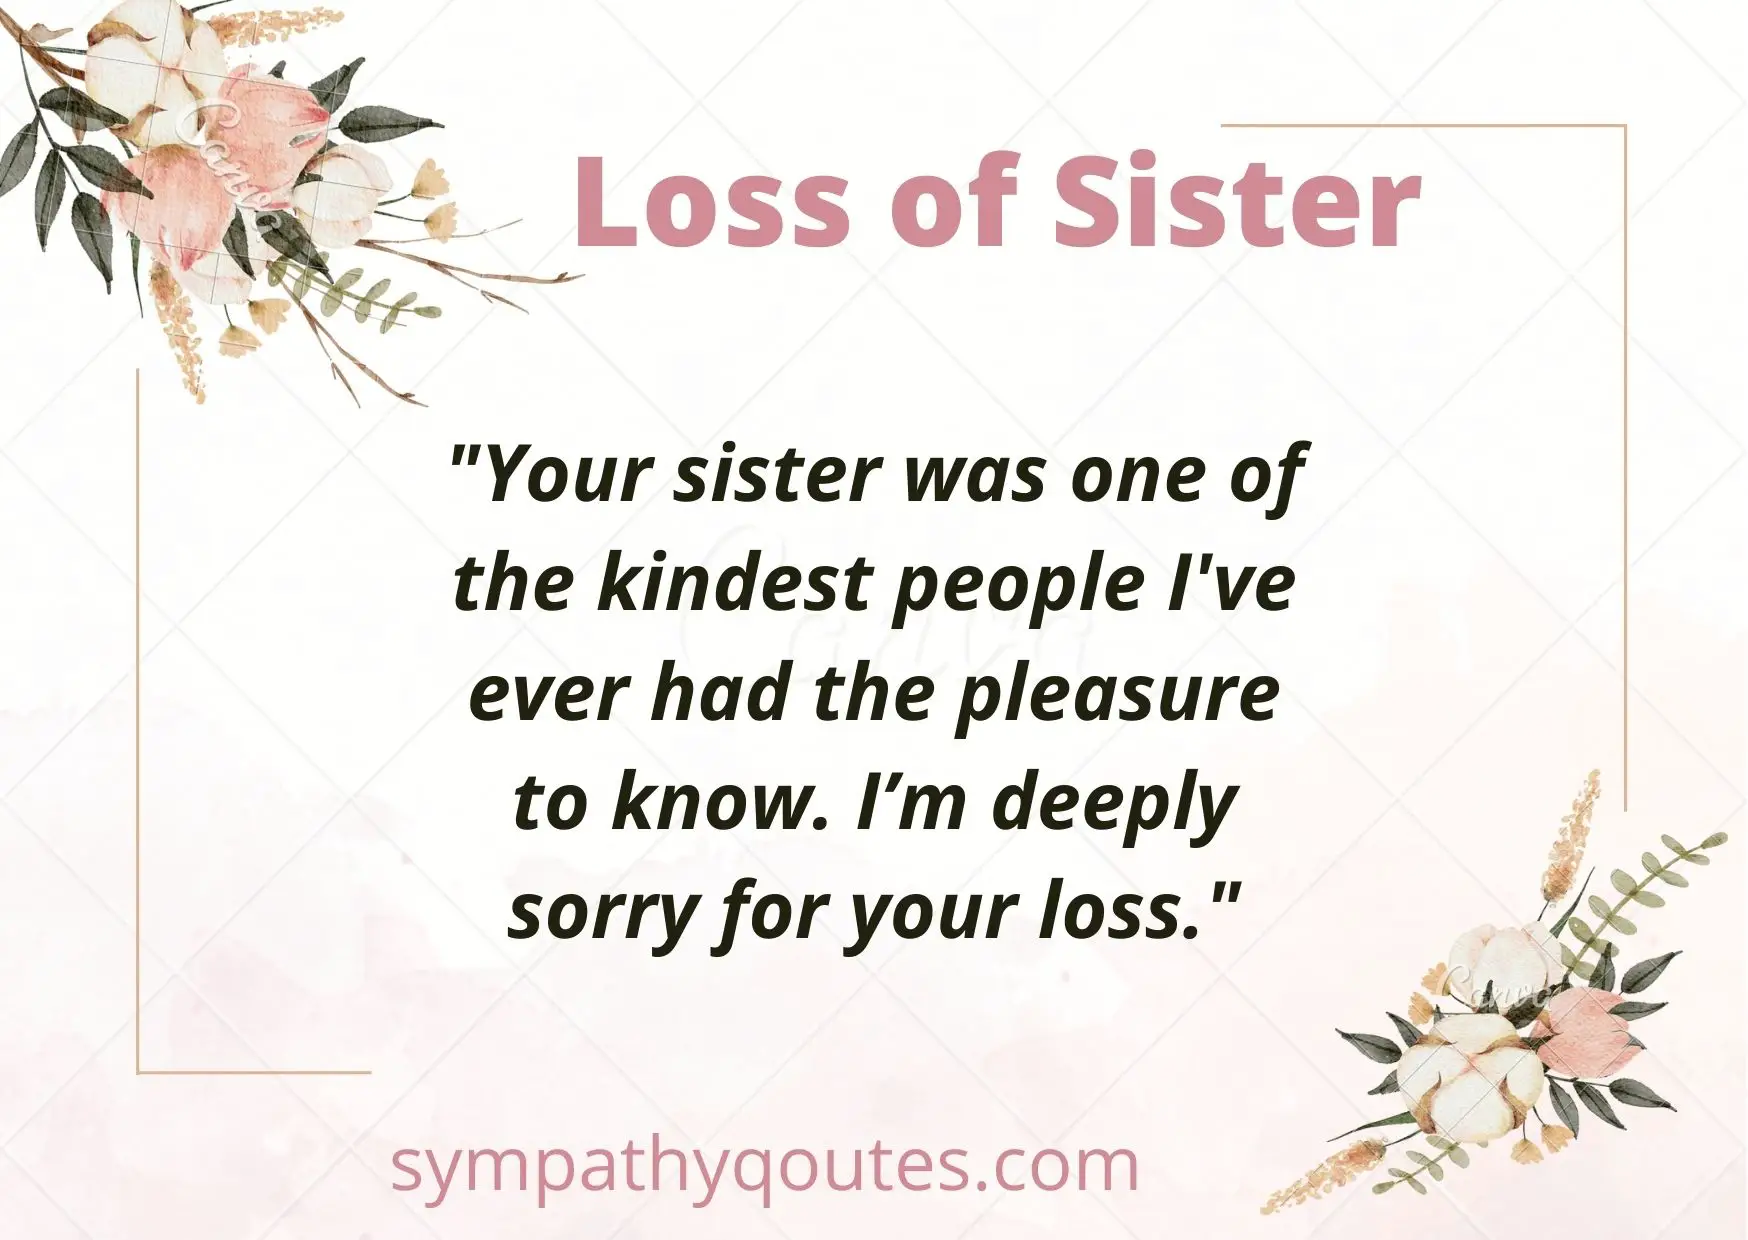 Condolence Messages for Loss of Sister